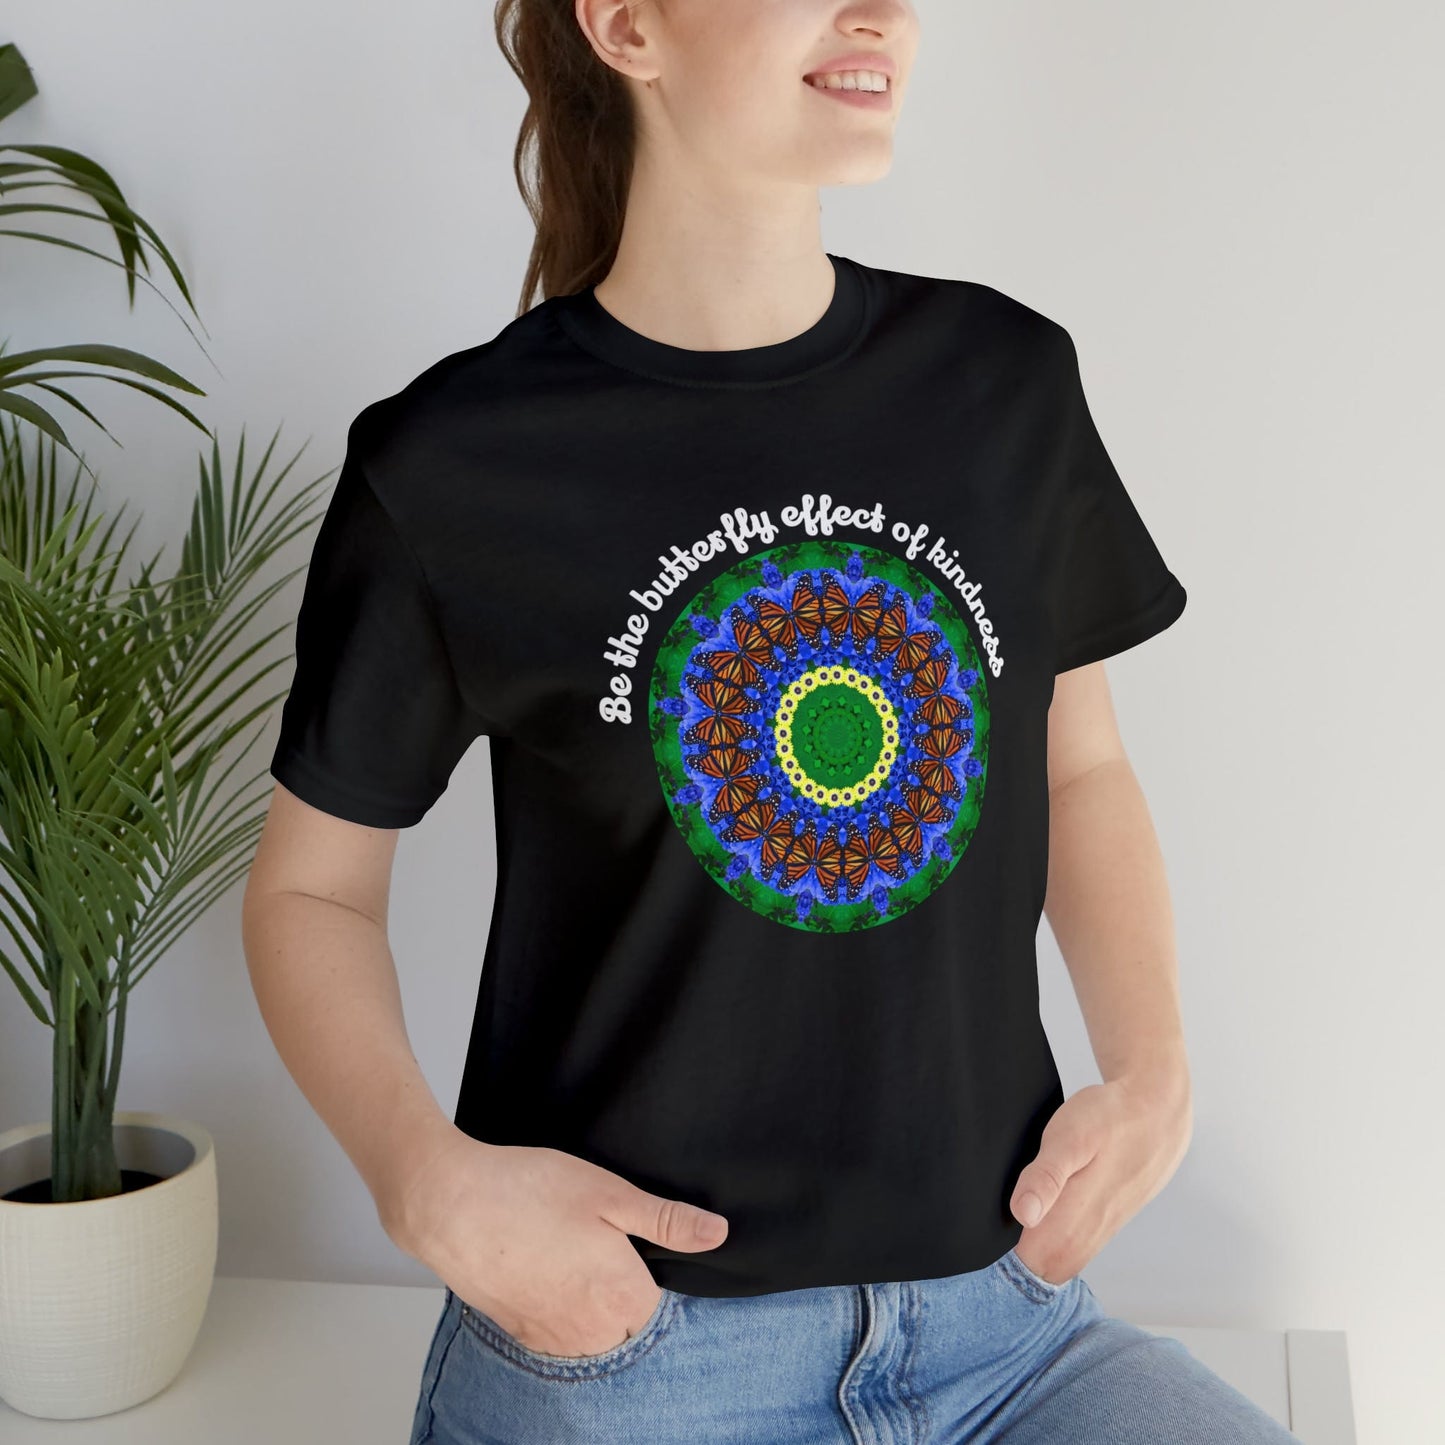 Cute Graphic Kindness Shirts  - Beautiful Monarch Butterfly Mandala Art For Positive Vibes – Butterfly Effect Black